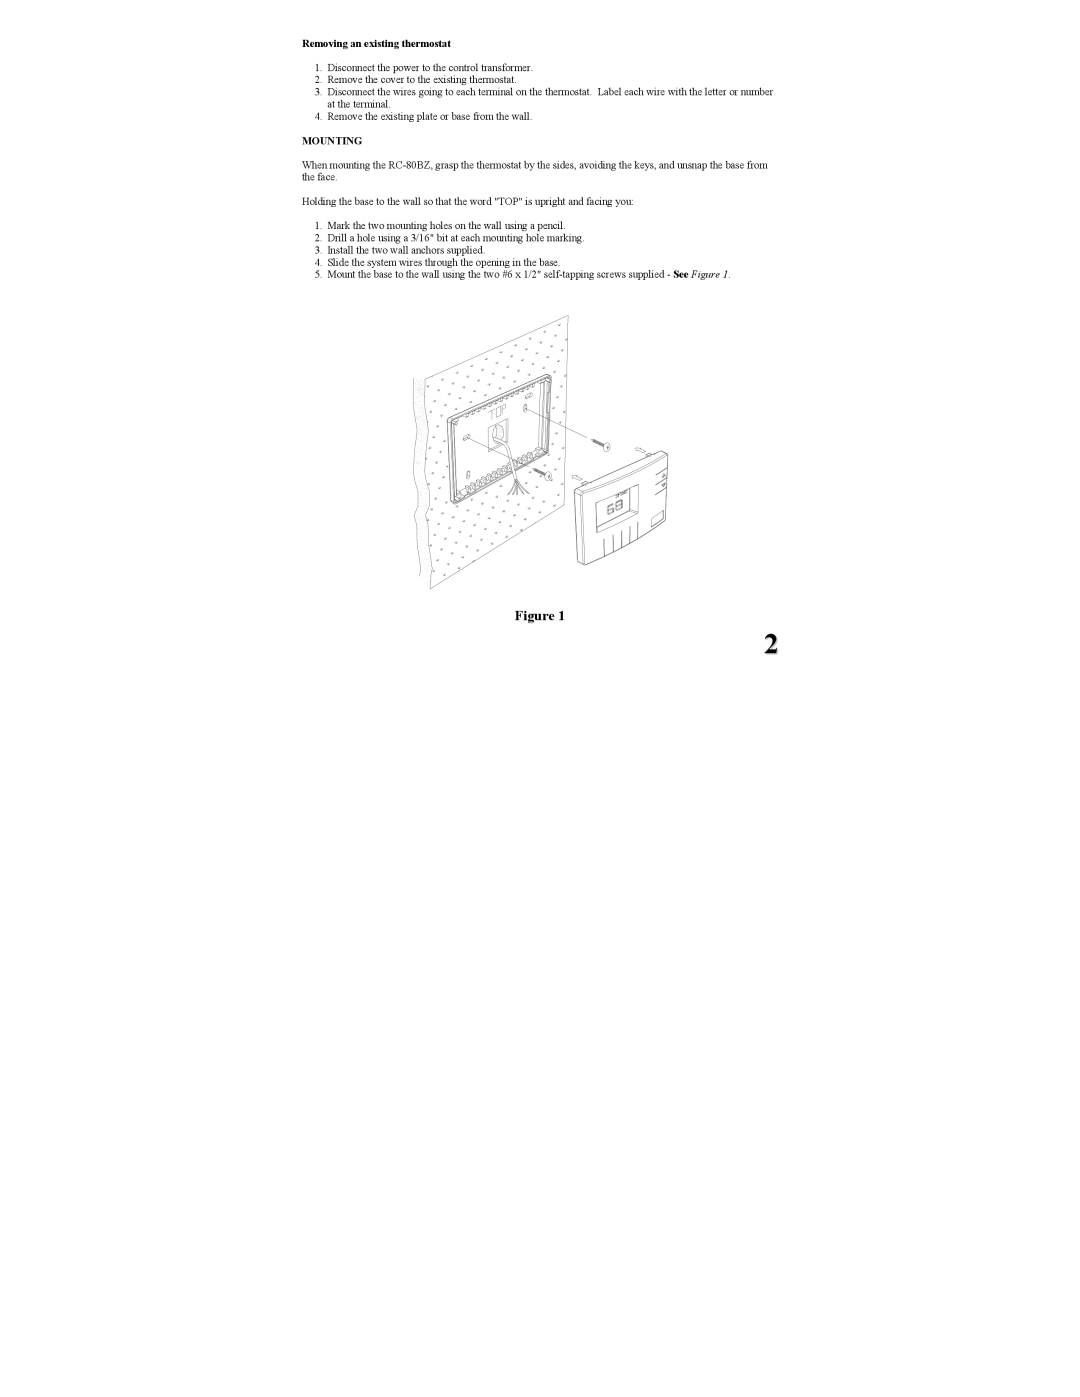 Home Automation RC-80BZ installation instructions Removing an existing thermostat, Mounting 